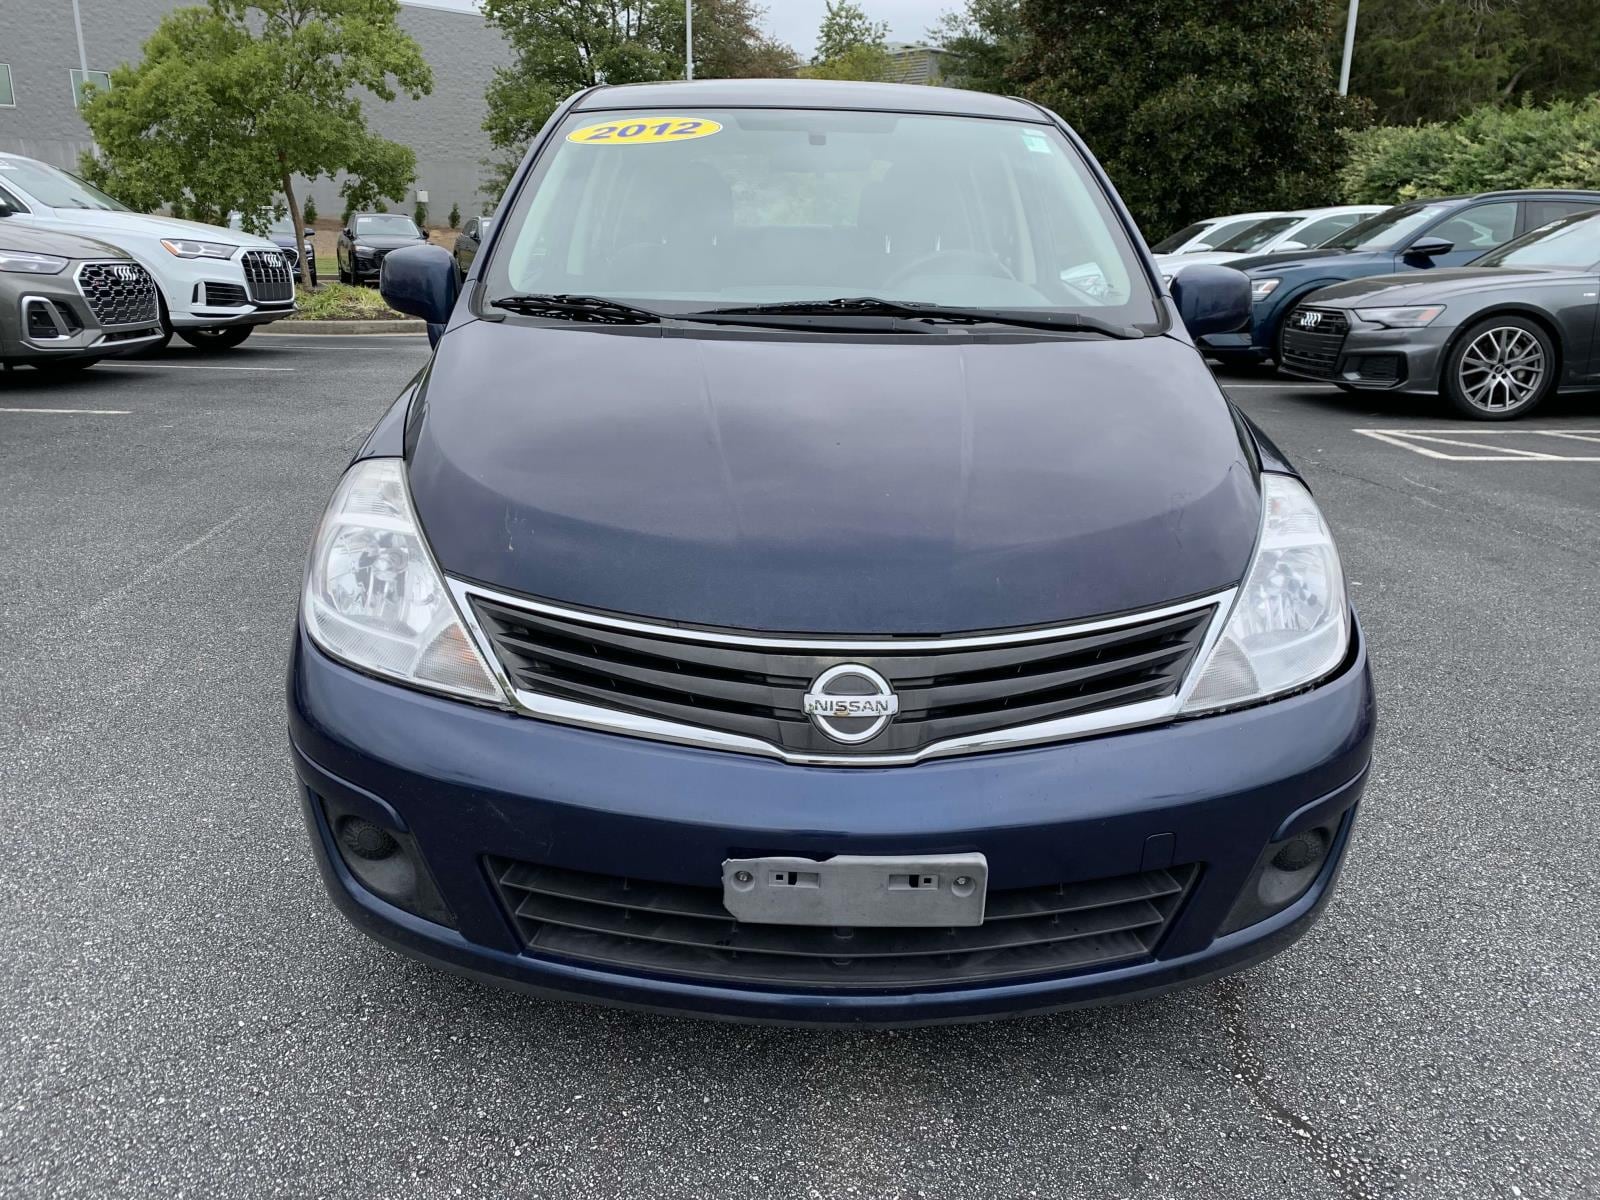 Used 2012 Nissan Versa S with VIN 3N1BC1CP8CK247393 for sale in Greenville, SC